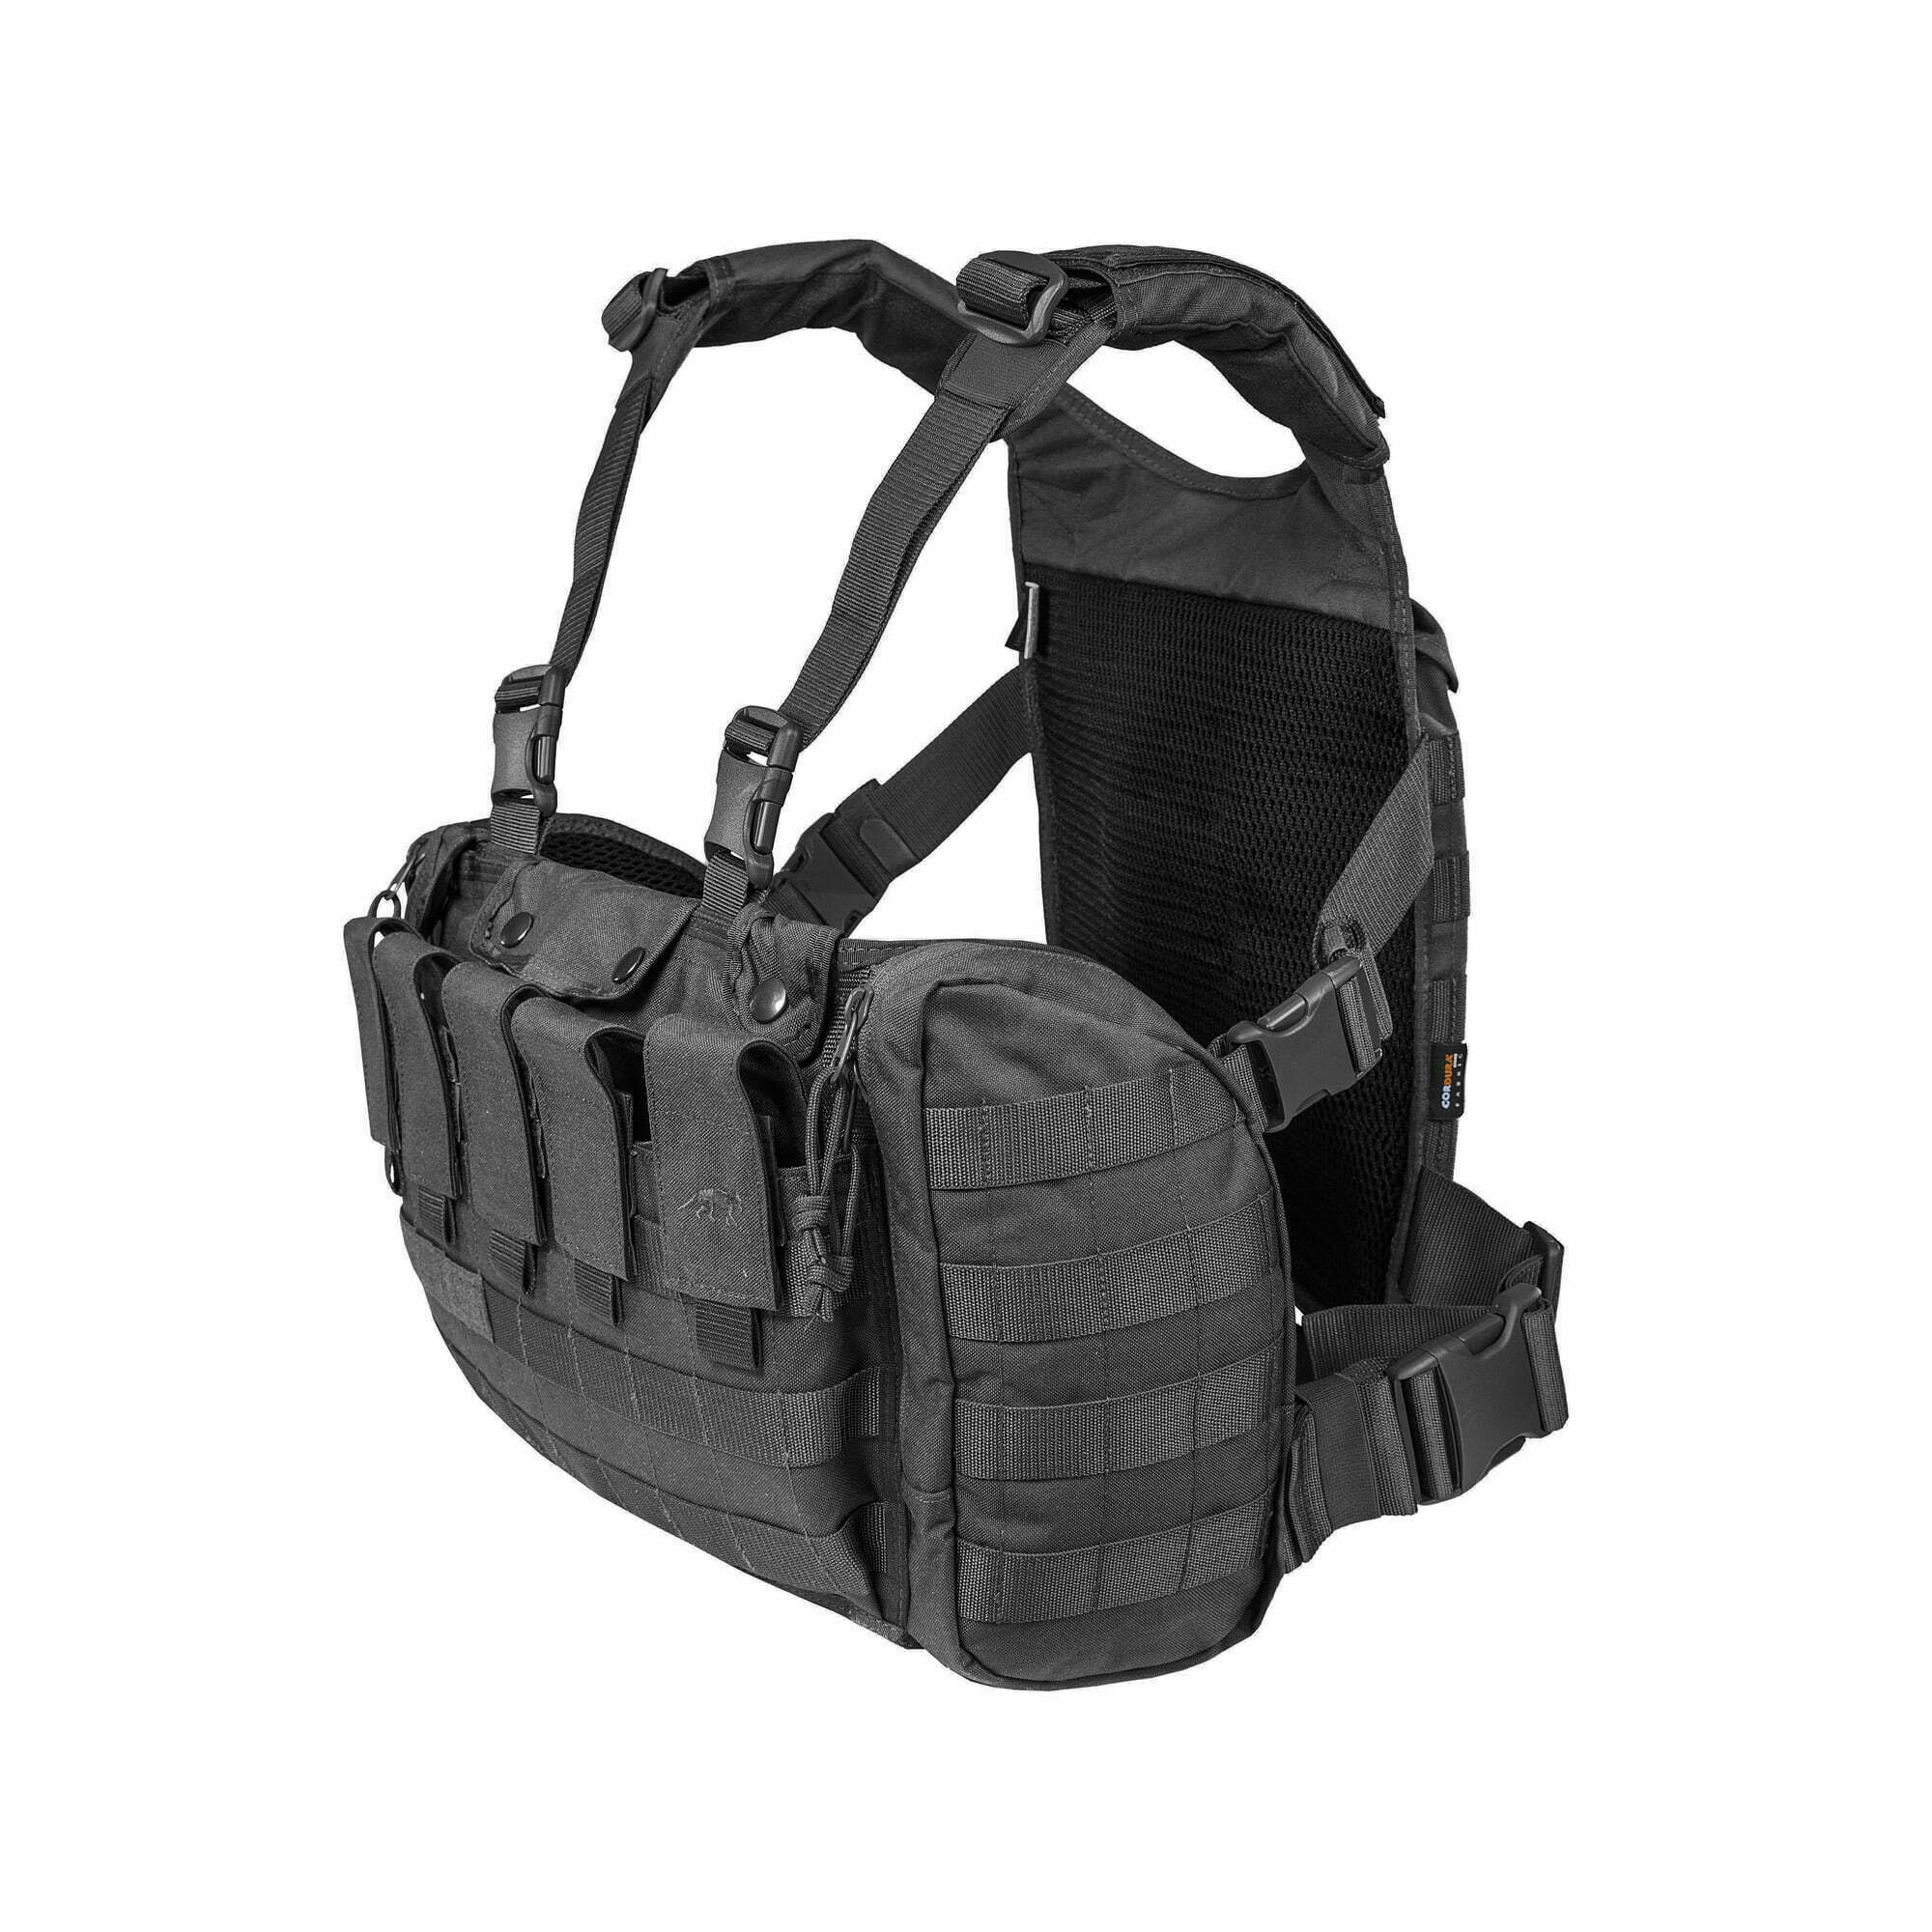 04_7160-TT-Chest-Rig-MKII_M4_Olive.eps